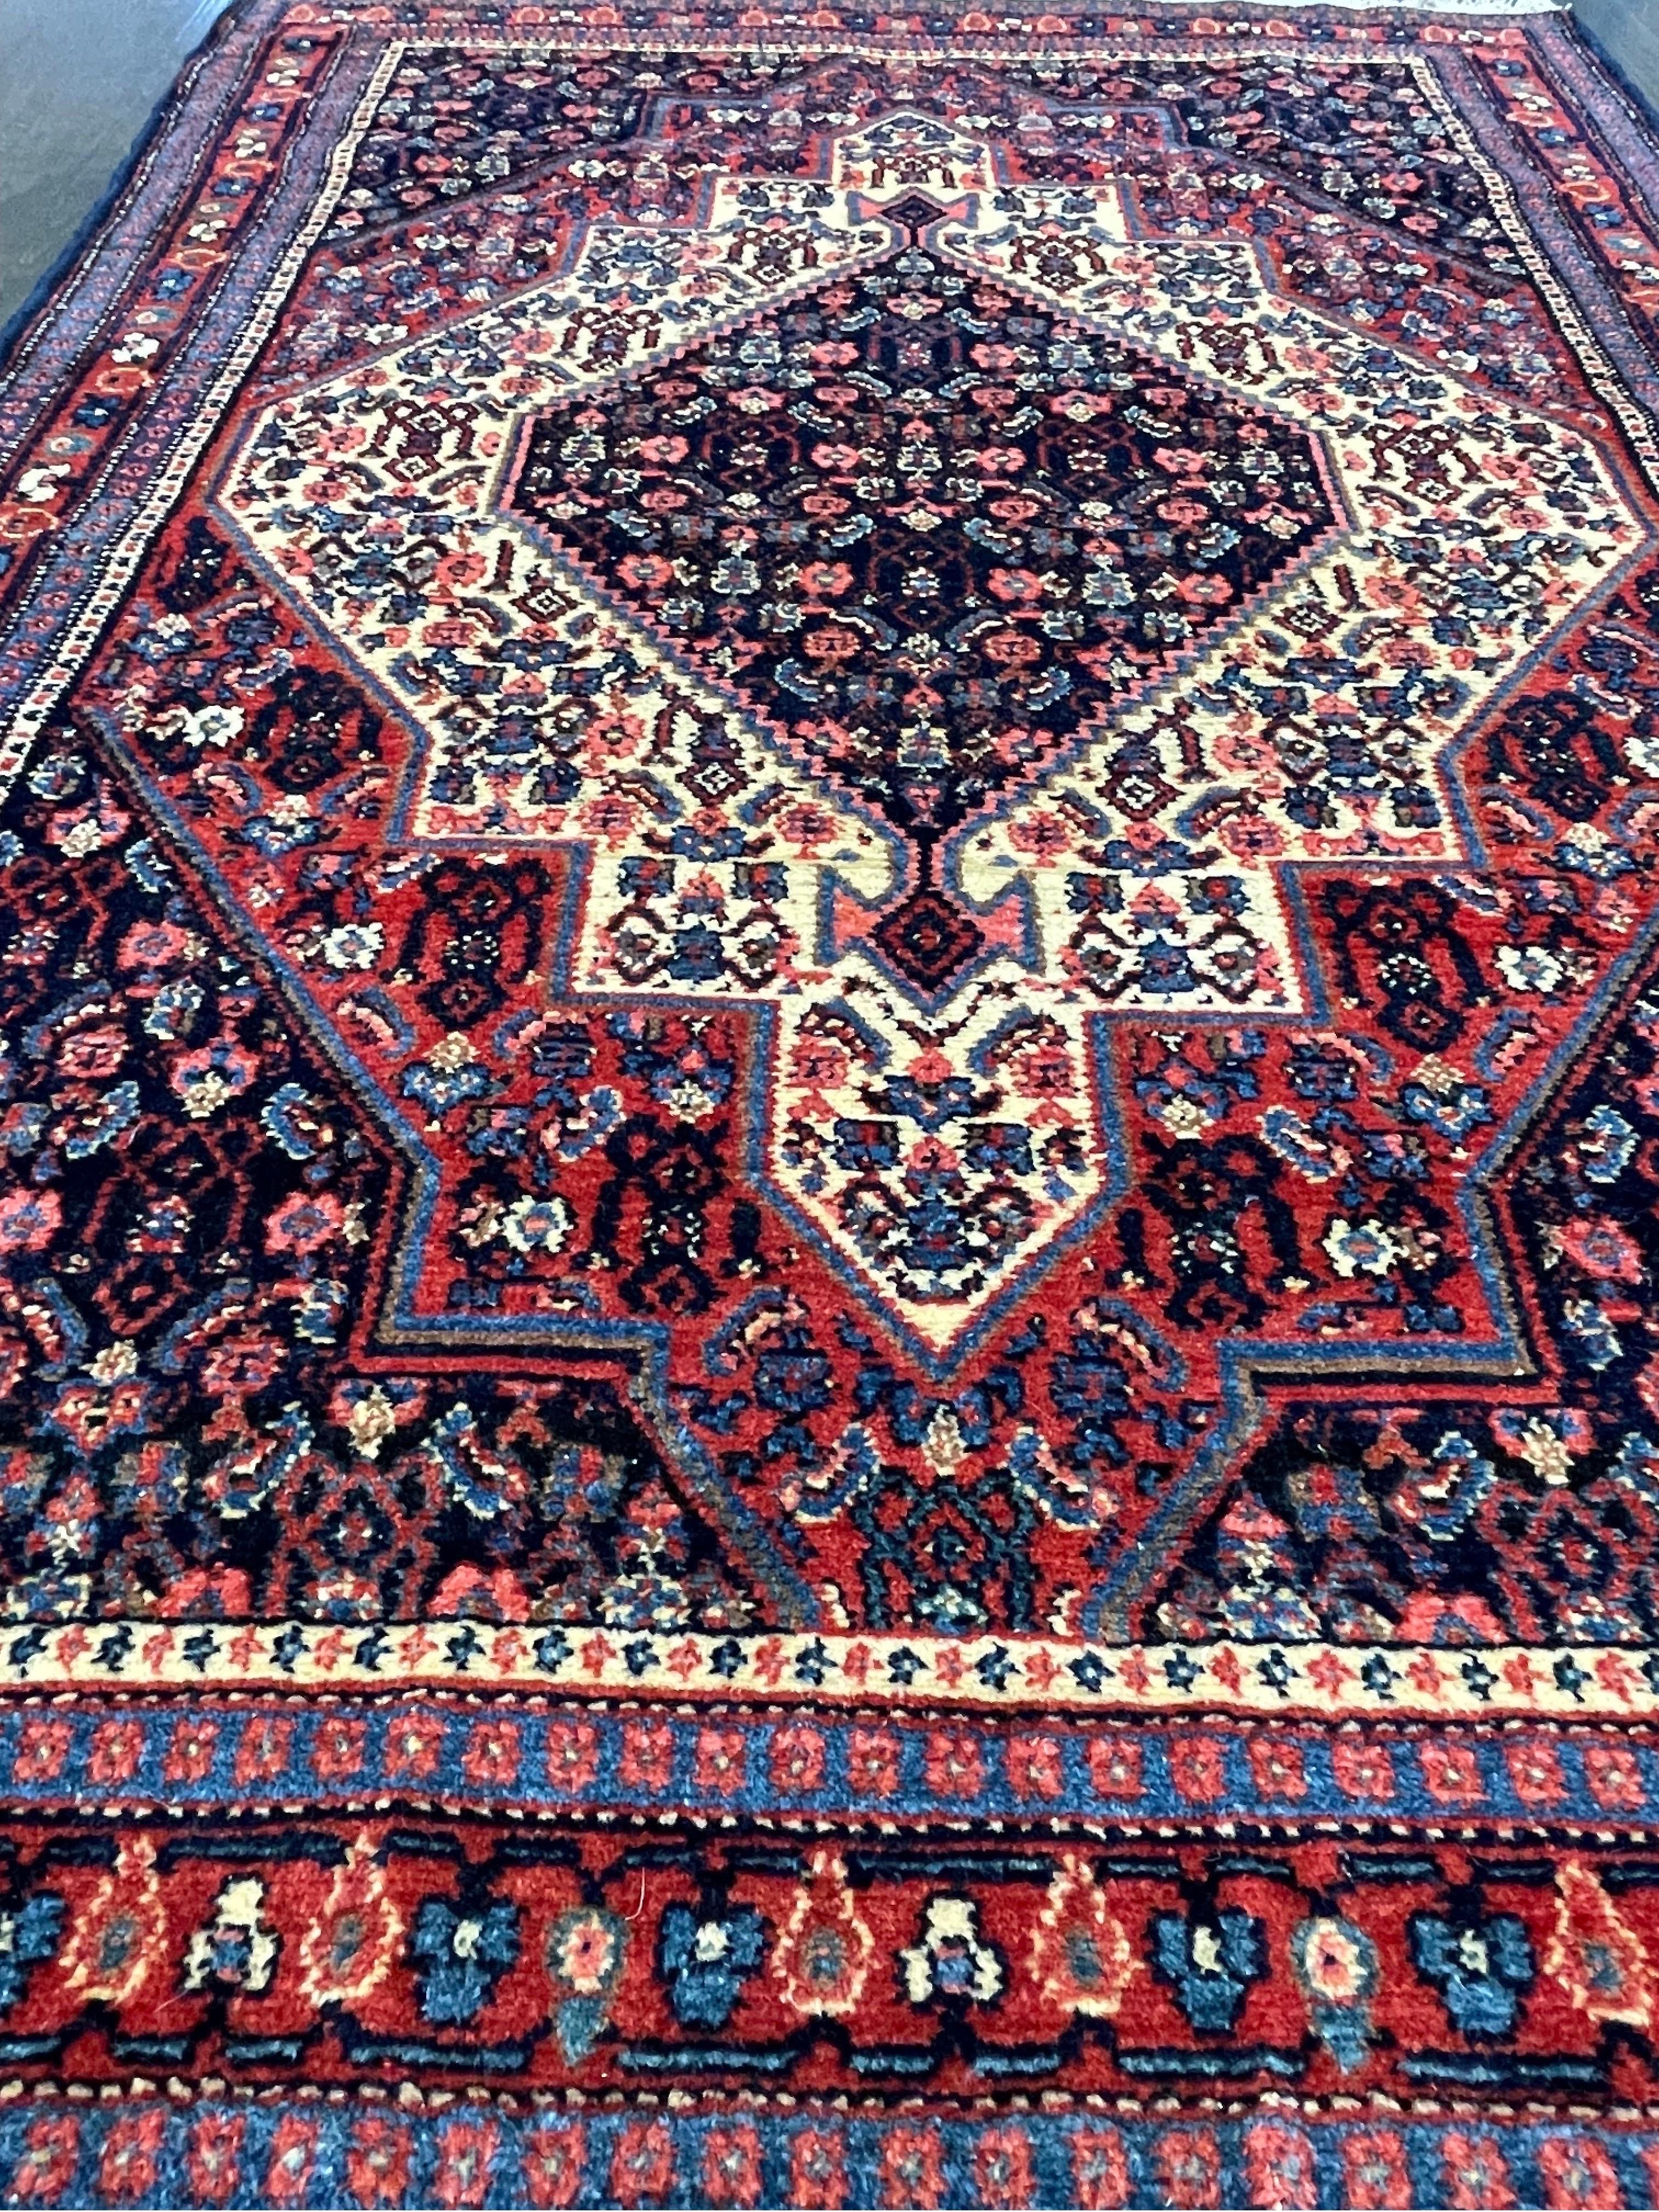 Vegetable Dyed Semi-Antique Persian Senneh Rug circa 1940 For Sale